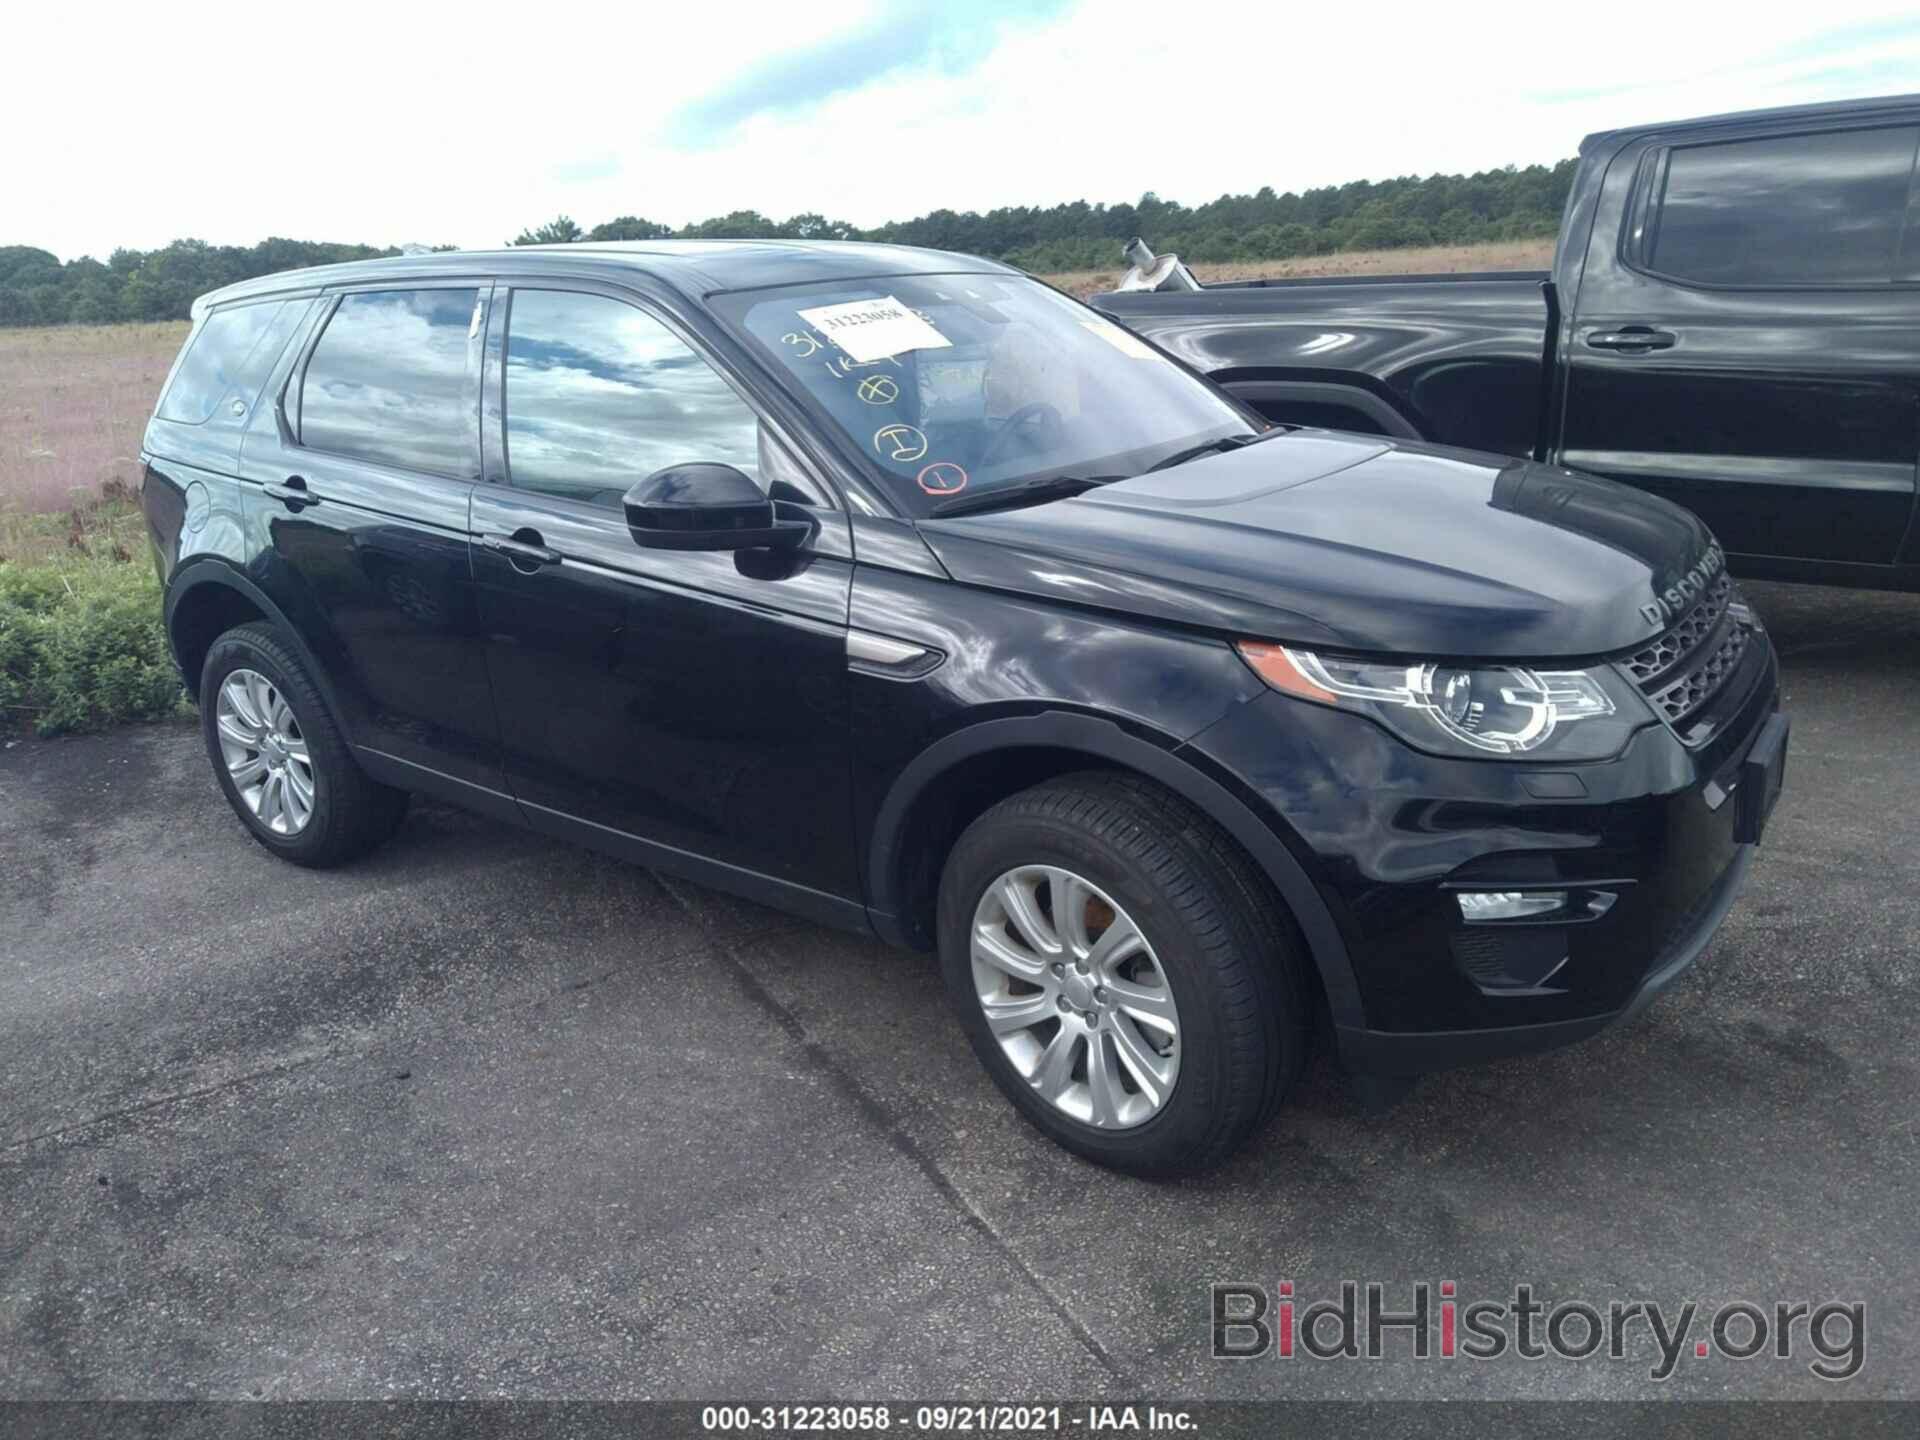 Фотография SALCP2FX1KH789118 - LAND ROVER DISCOVERY SPORT 2019